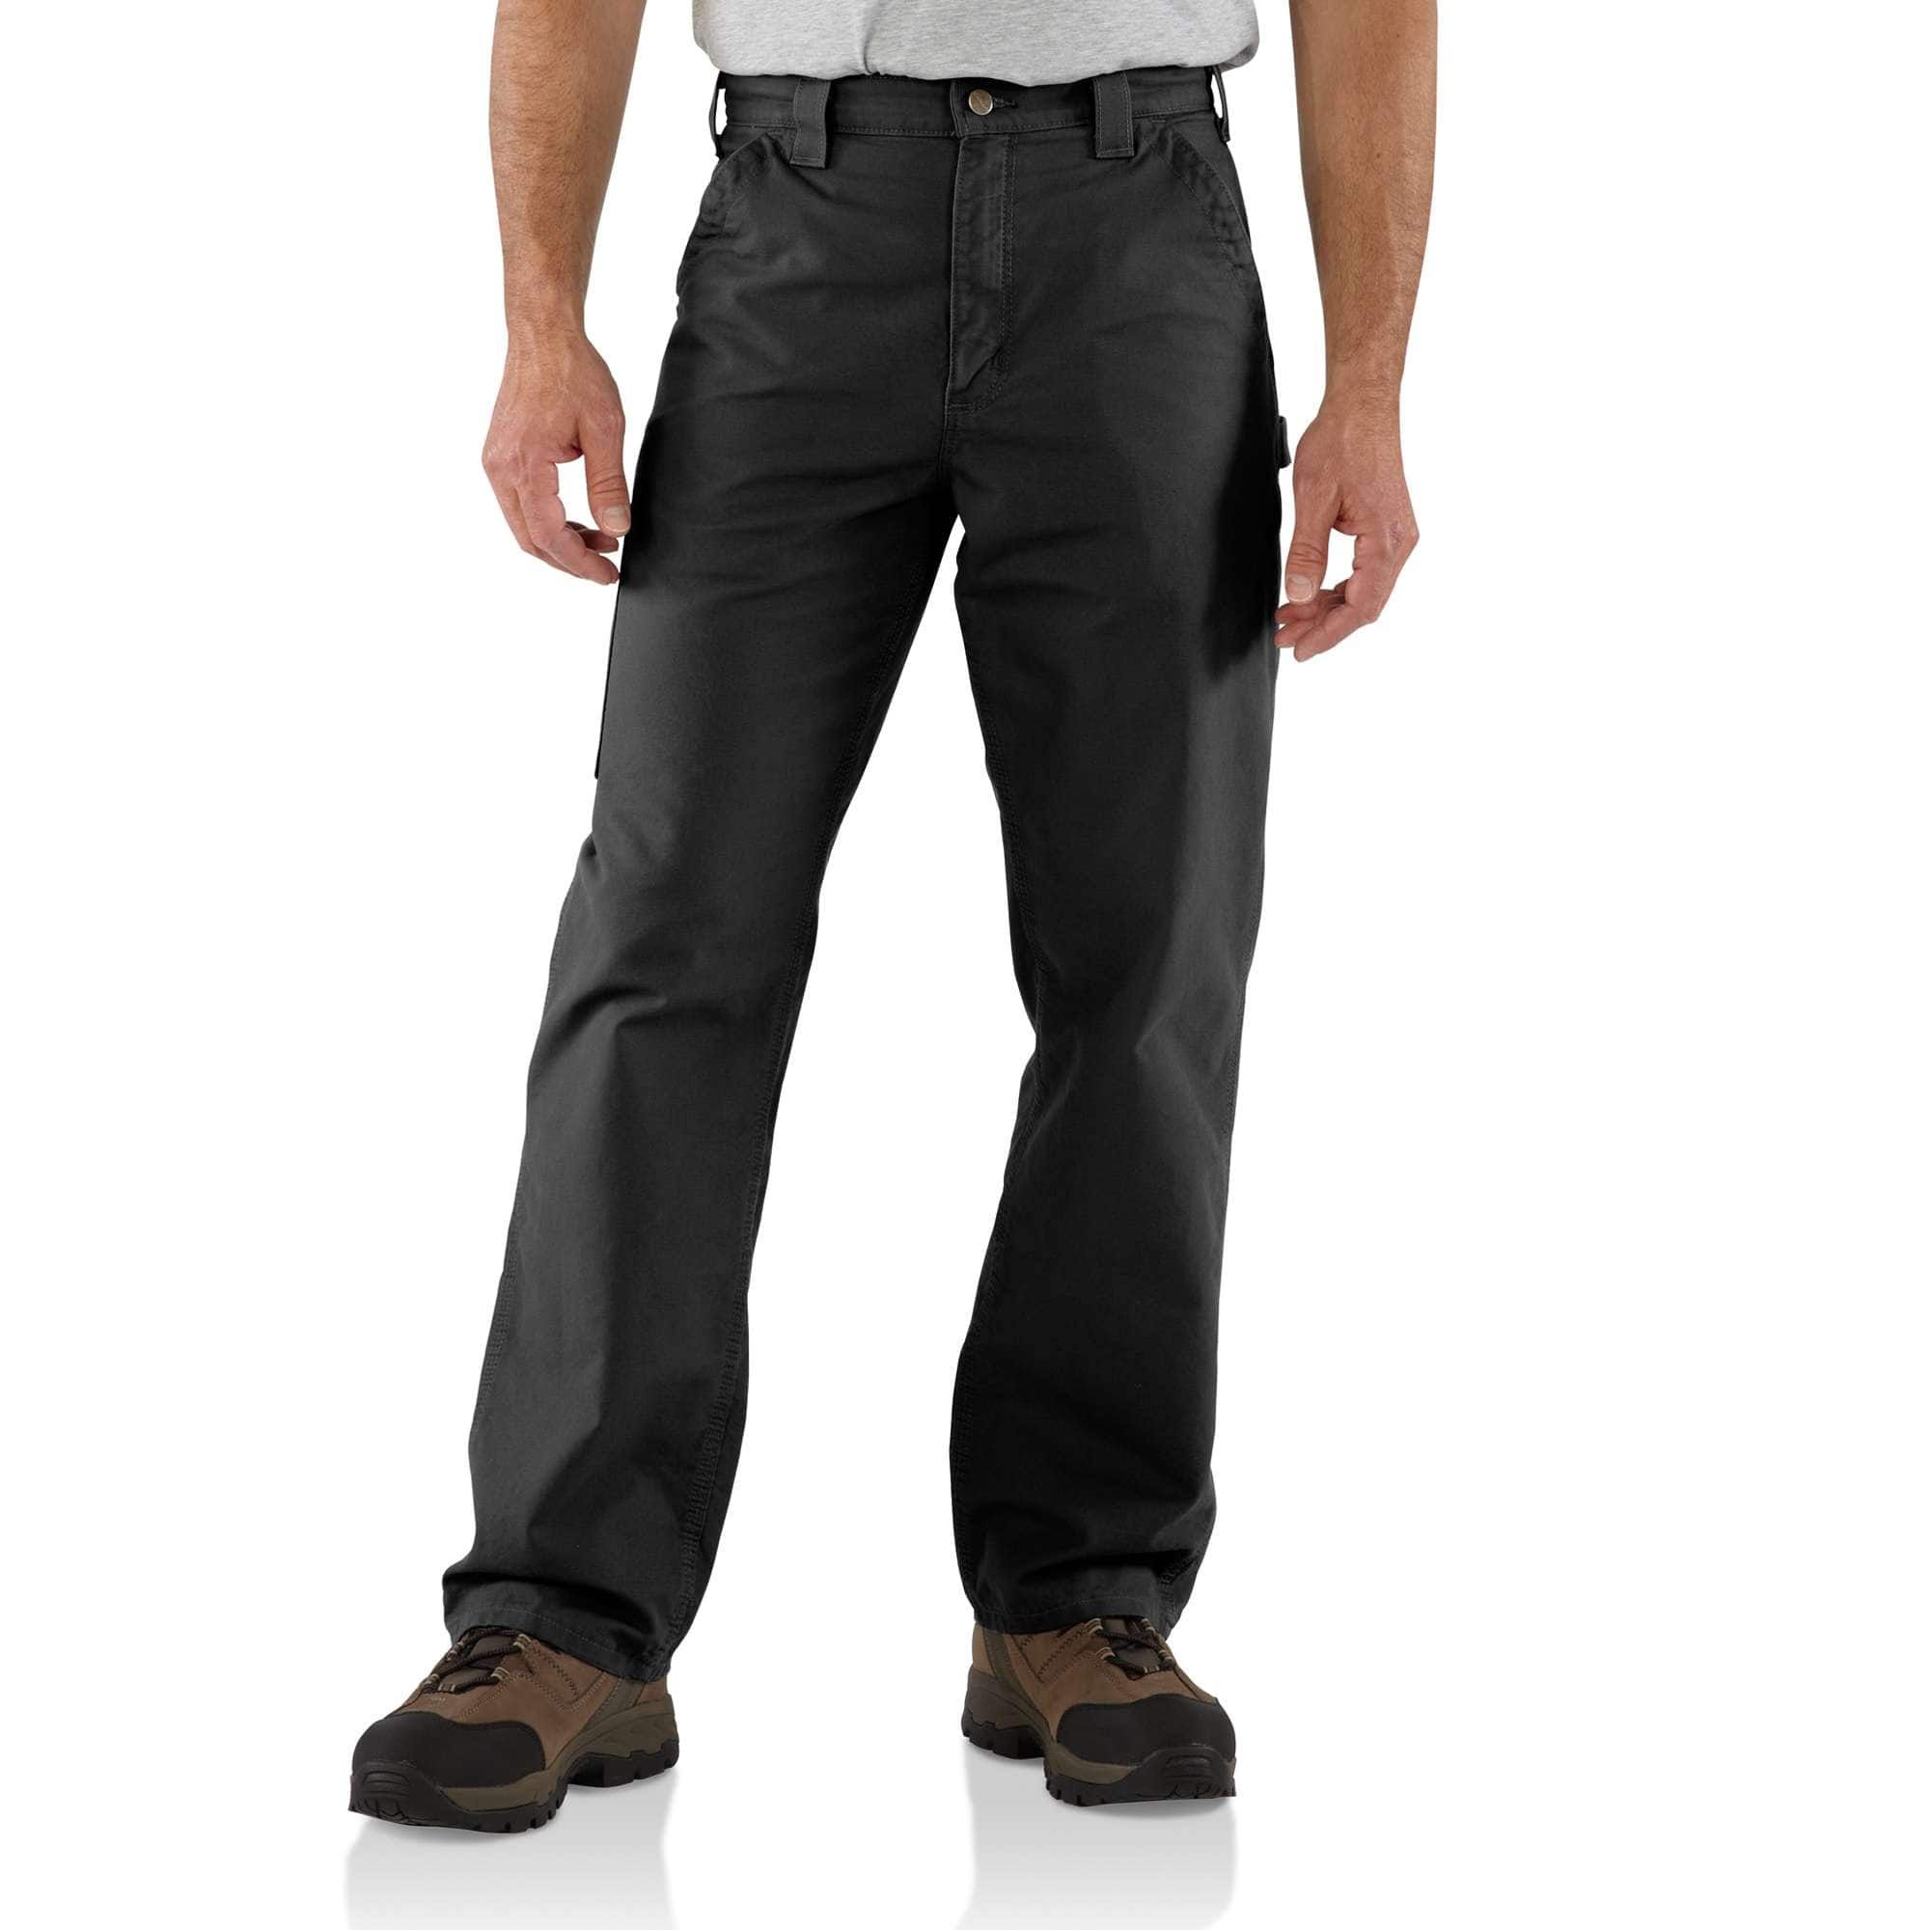 PRODUCTS: 10.5 oz. Relaxed-Fit FR Stretch Denim Work Pants, 32 Inseam